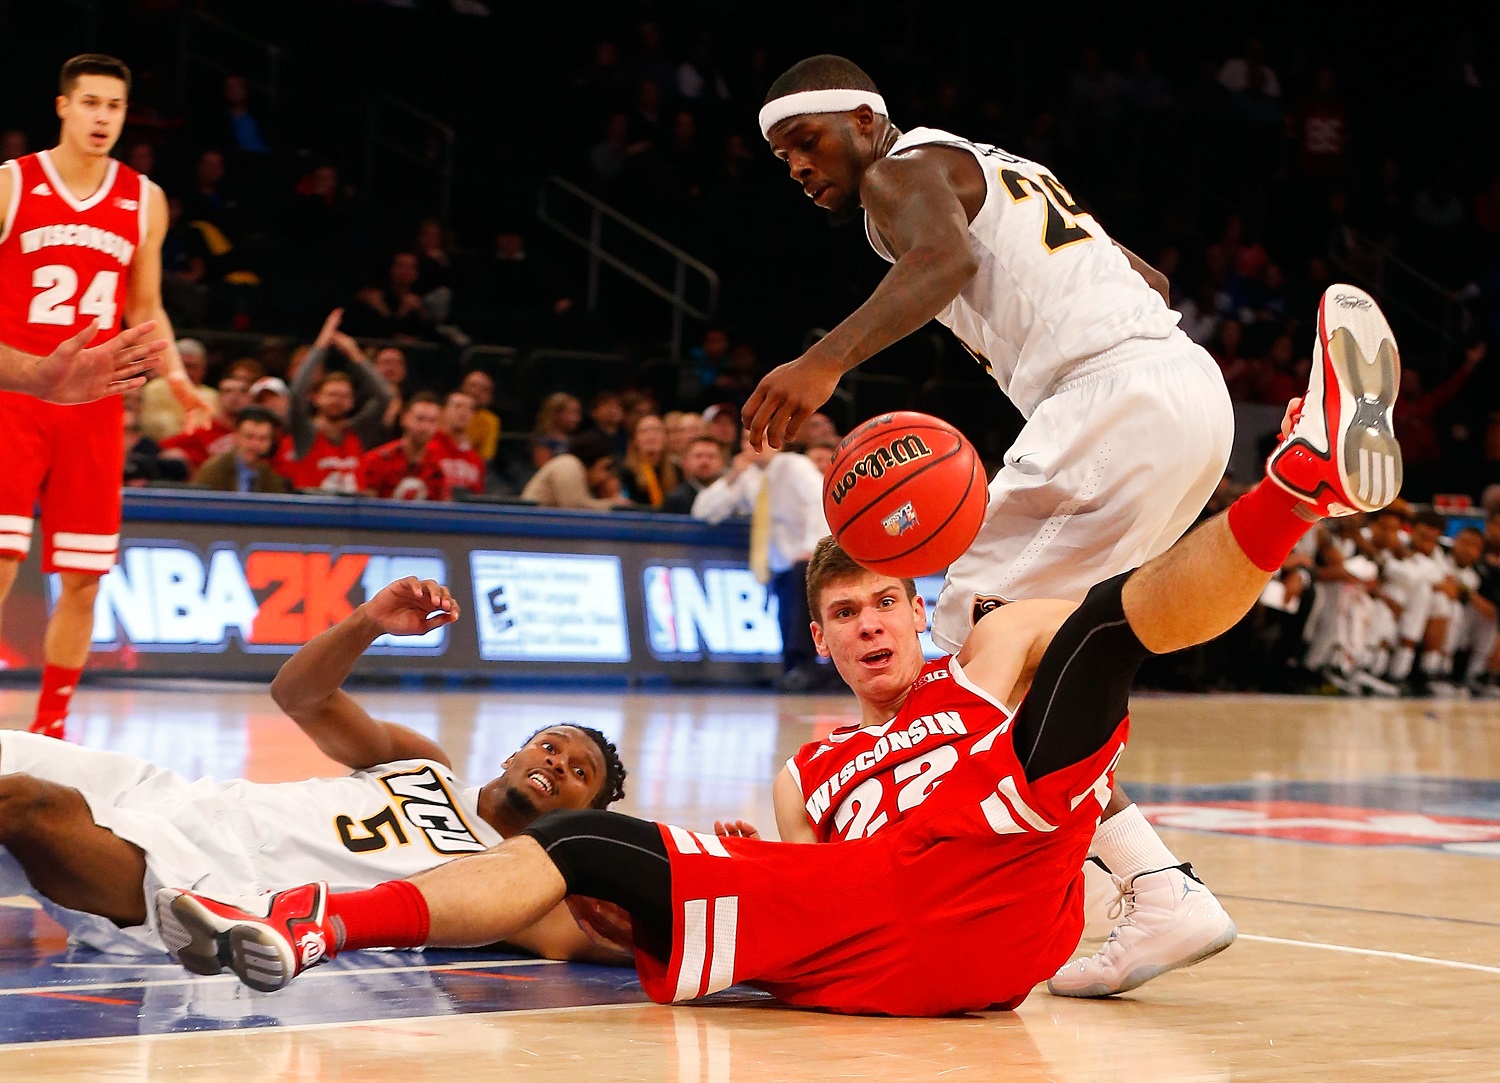 Are new college basketball rules hurting slow teams?